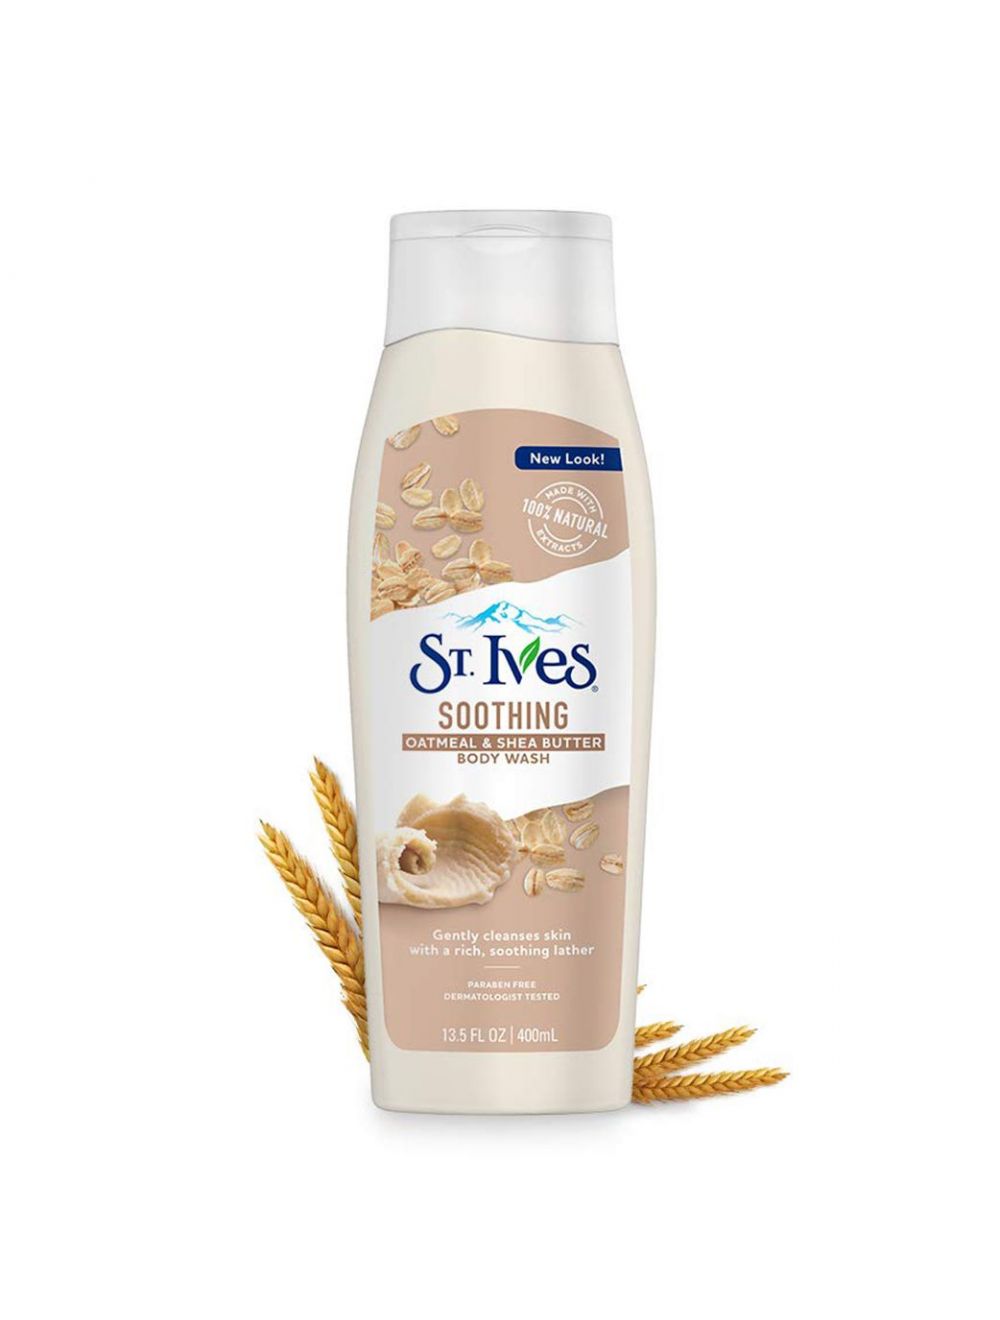 St. Ives Soothing Oatmeal & Shea Butter Body Wash (400ml)